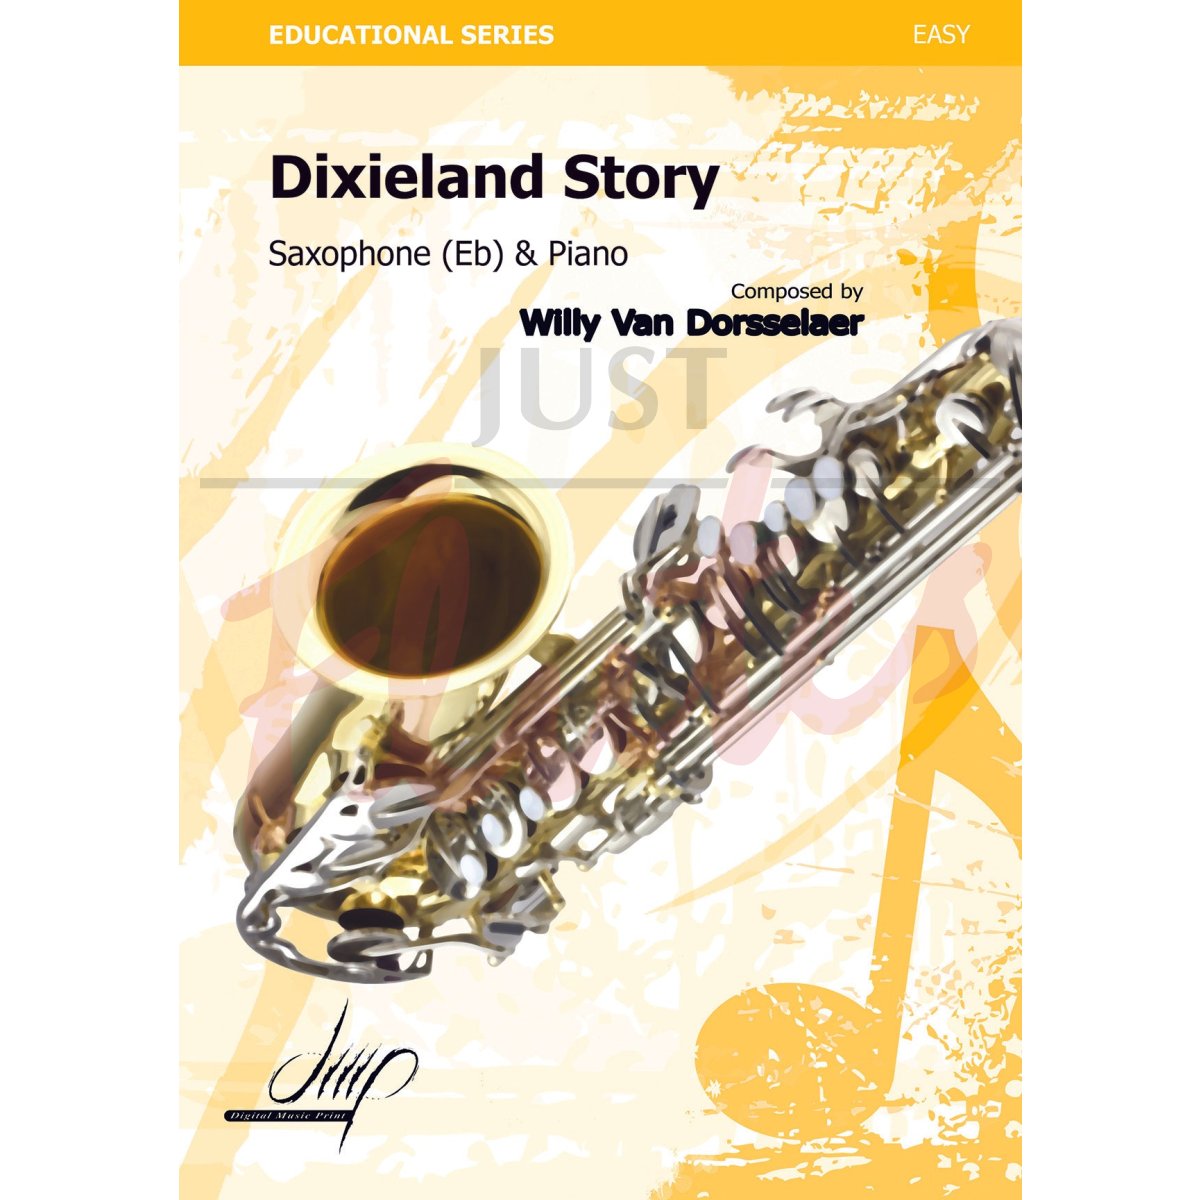 Dixieland Story for Alto Saxophone and Piano